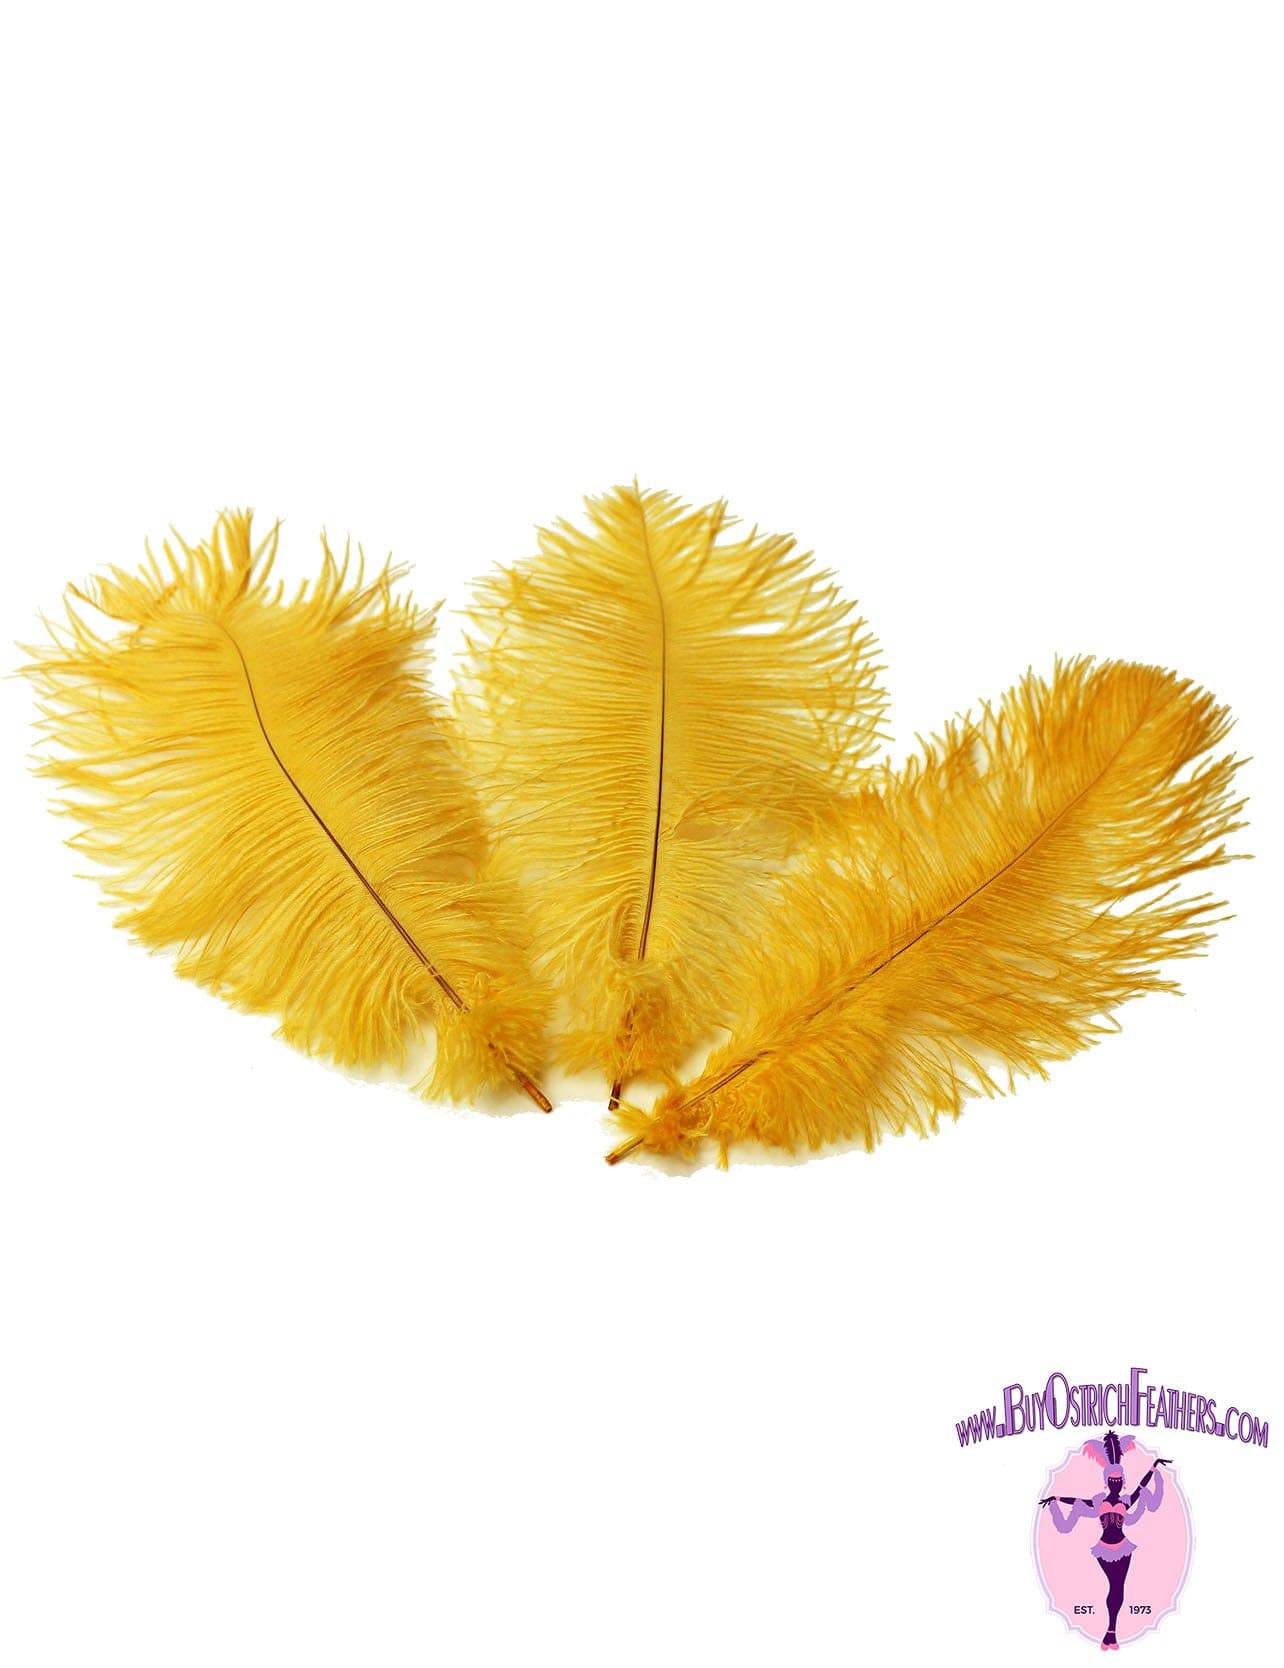 Ostrich Feather Tail Plumes 15-18" (Golden Yellow) - Buy Ostrich Feathers